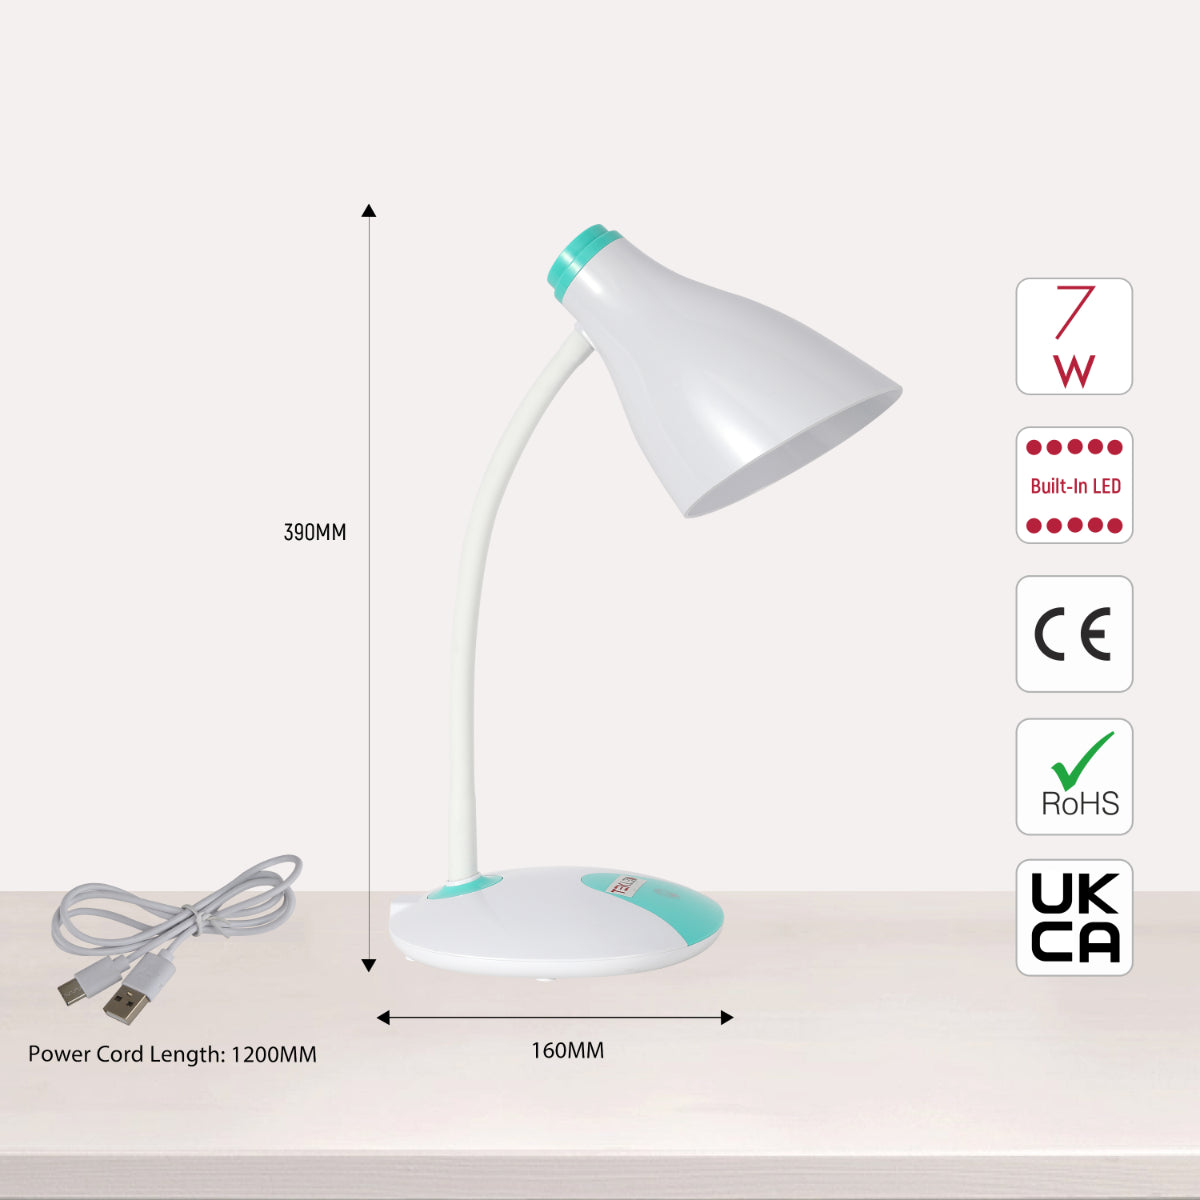 Size and certifications of Adjustable Gooseneck LED Desk Lamp with Dual Colour Design 130-03758